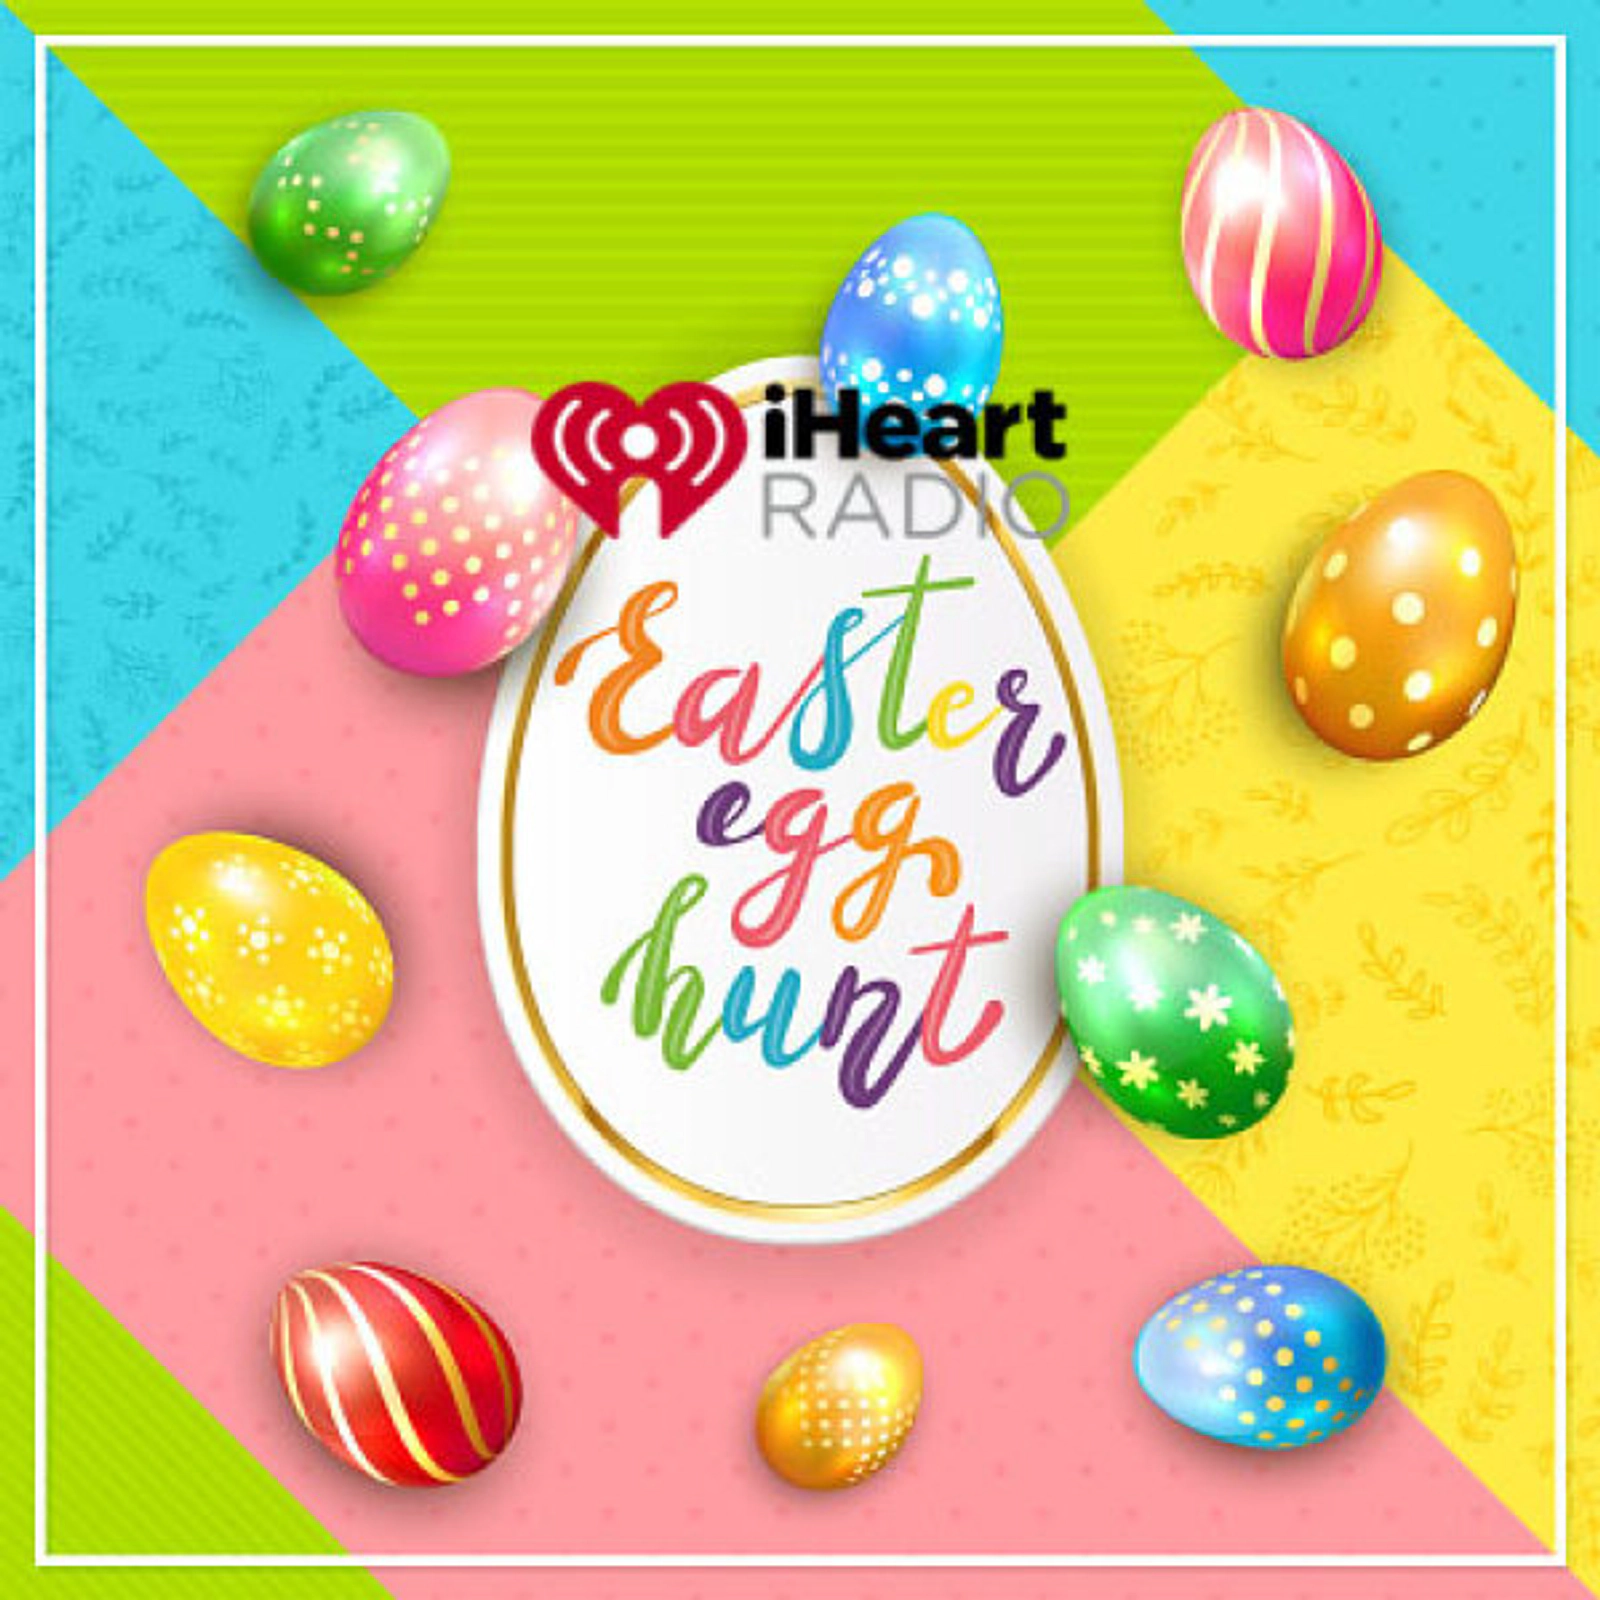 Try to find the Eggs on our iHeartRadio Virtual Easter Egg Hunt! - Thumbnail Image